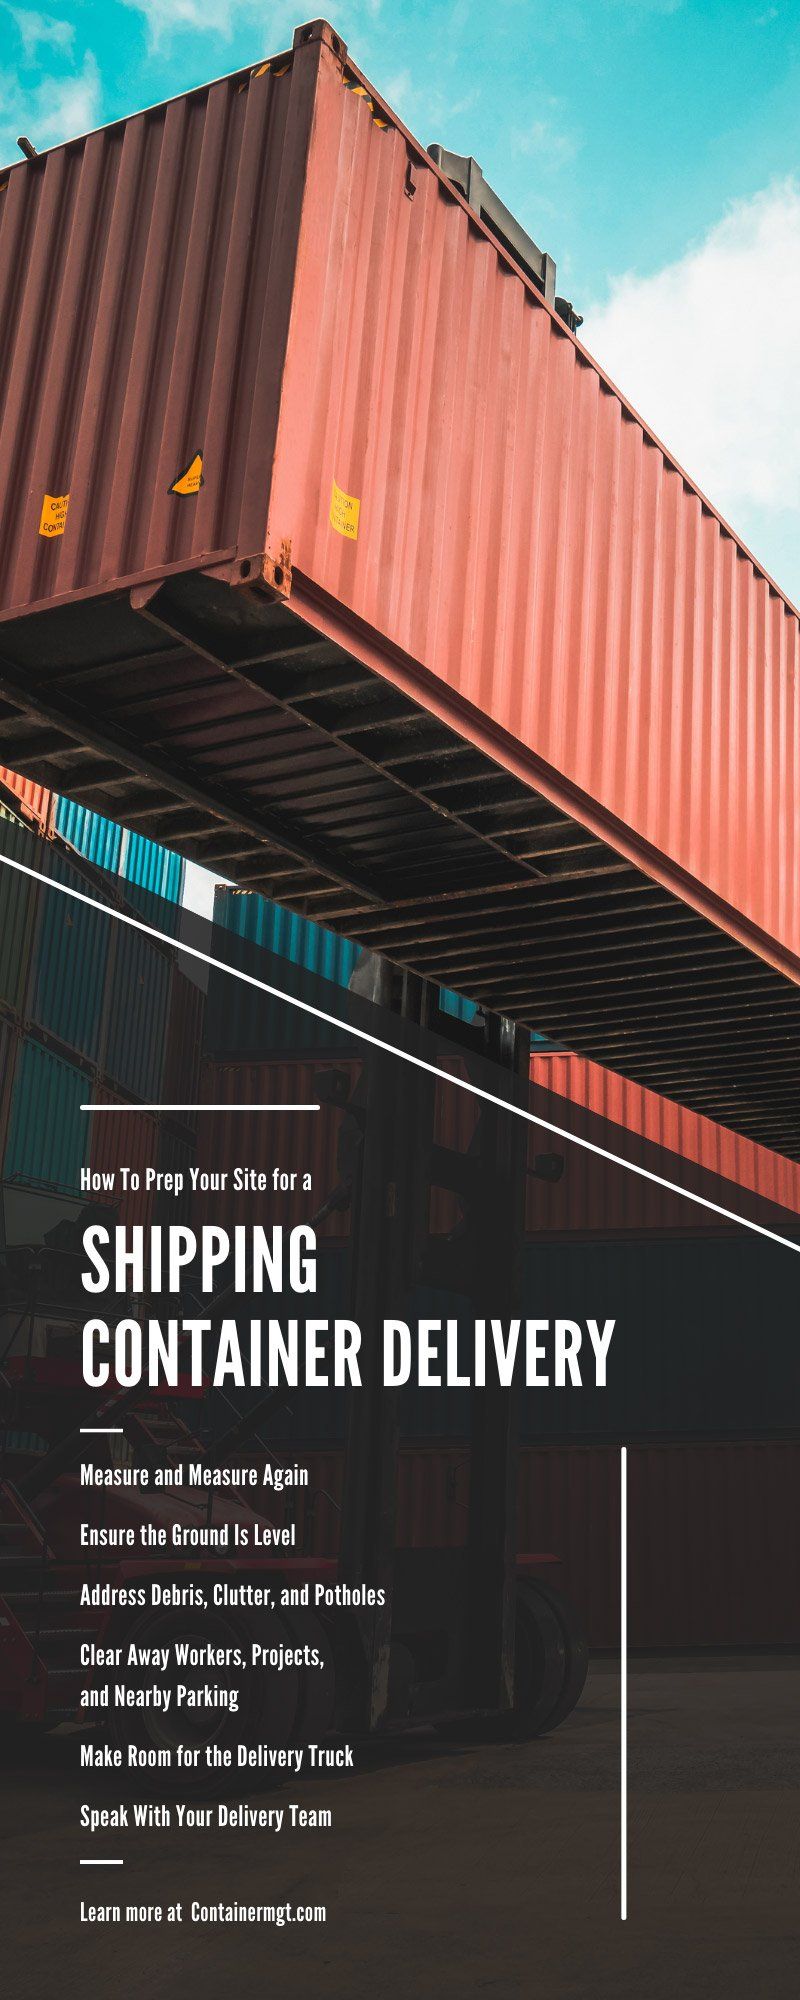 How To Prep Your Site for a Shipping Container Delivery